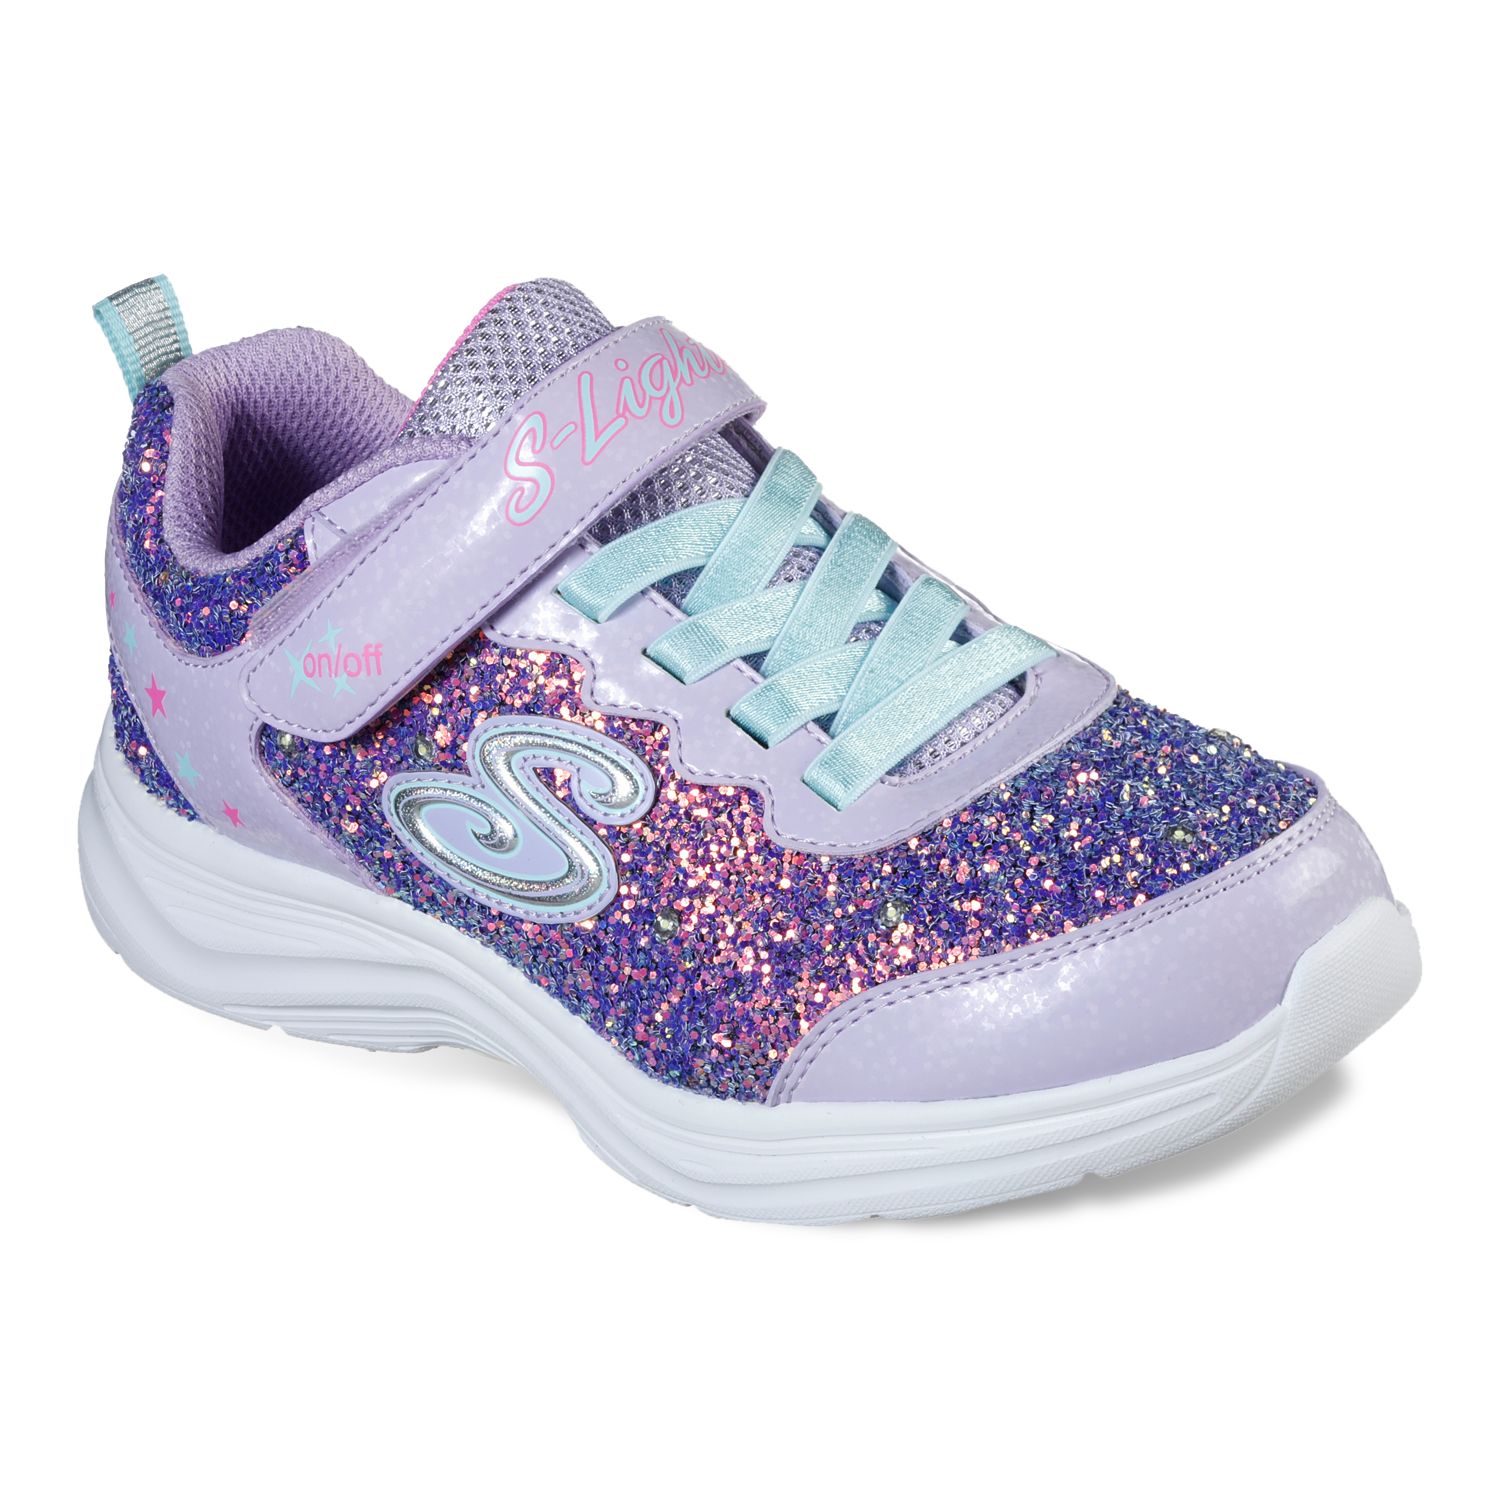 skechers childrens shoes sale